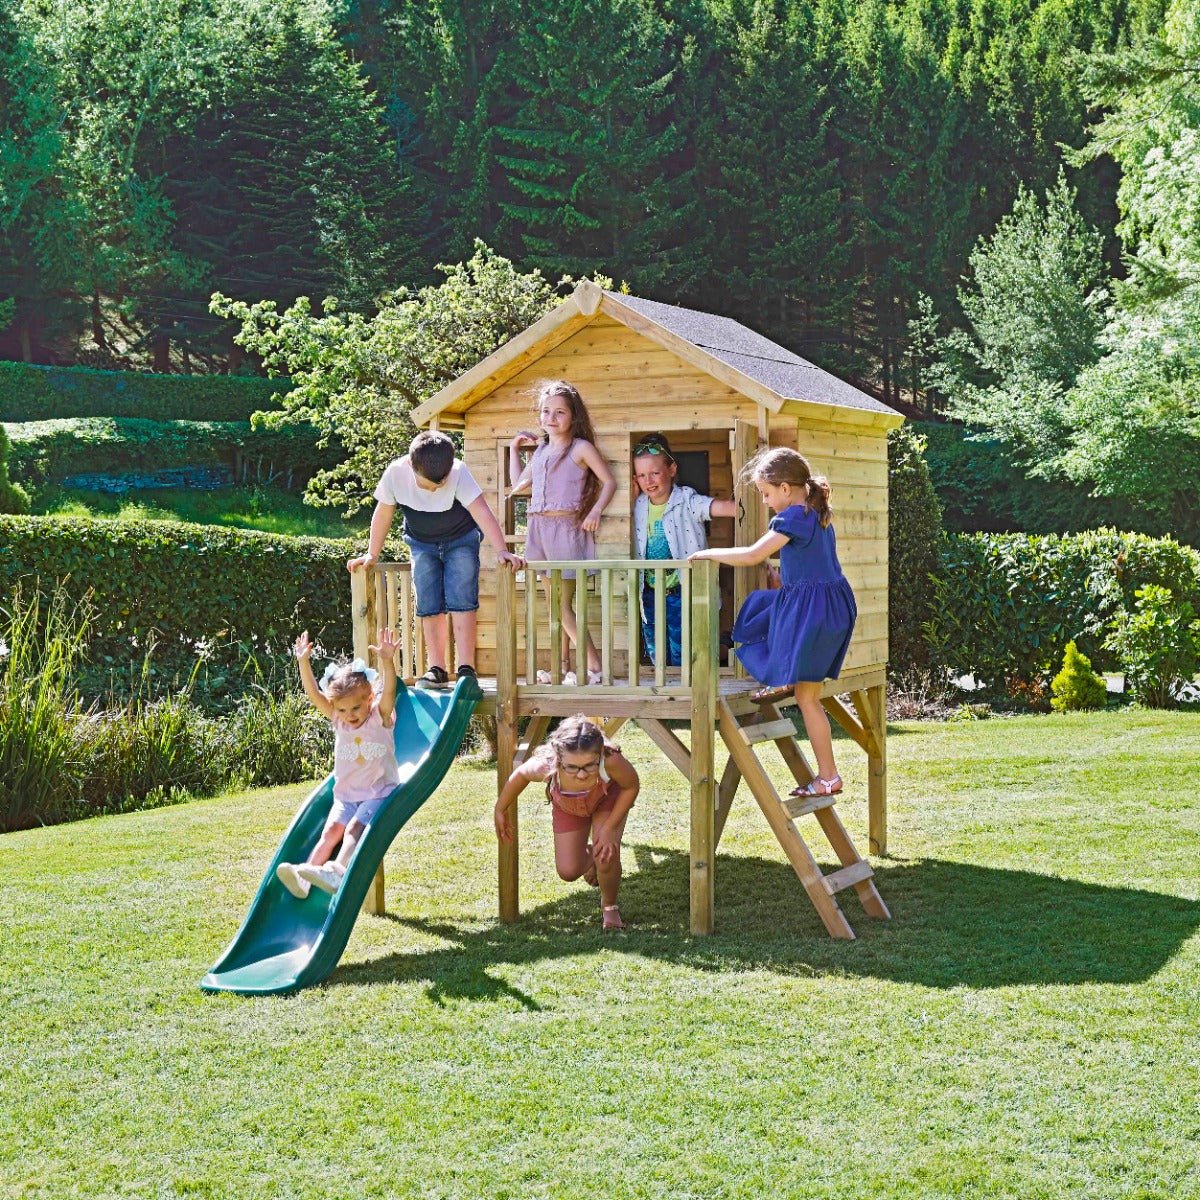 Rebo 5FT x 5FT Childrens Wooden Garden Playhouse on Deck with 6ft Slide - Nightingale Purple